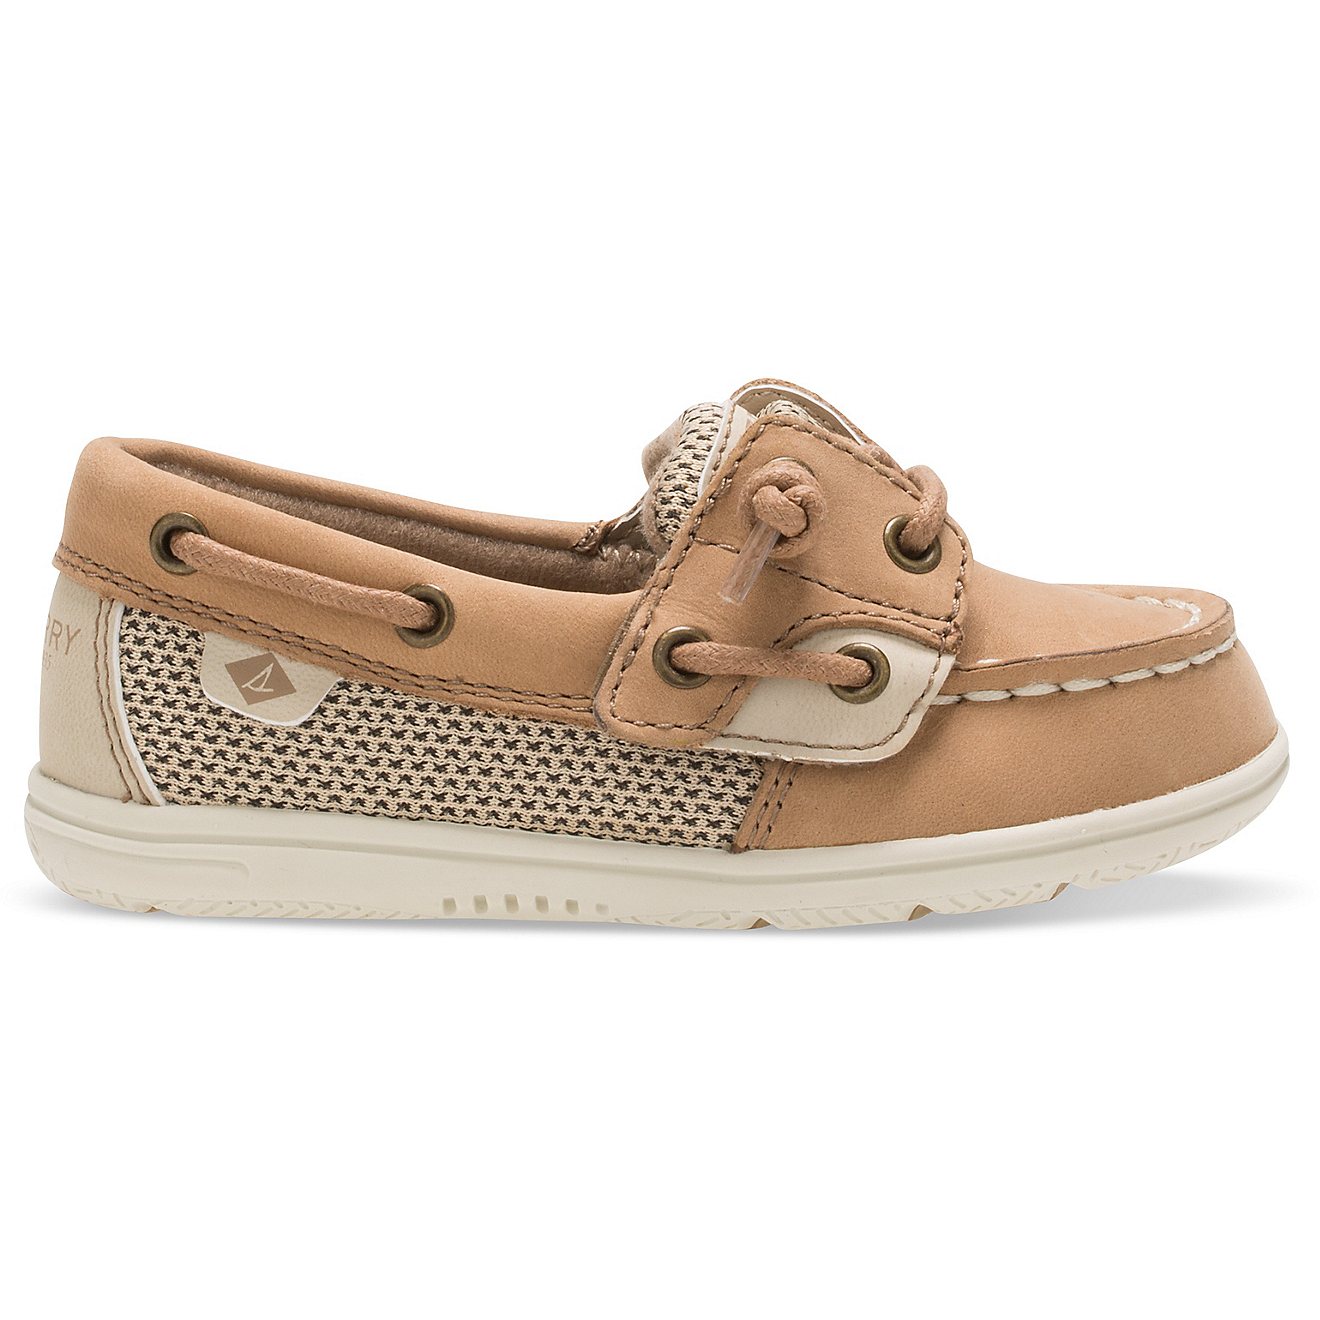 Sperry Toddler Girls' Shoresider Jr Boat Shoes                                                                                   - view number 1